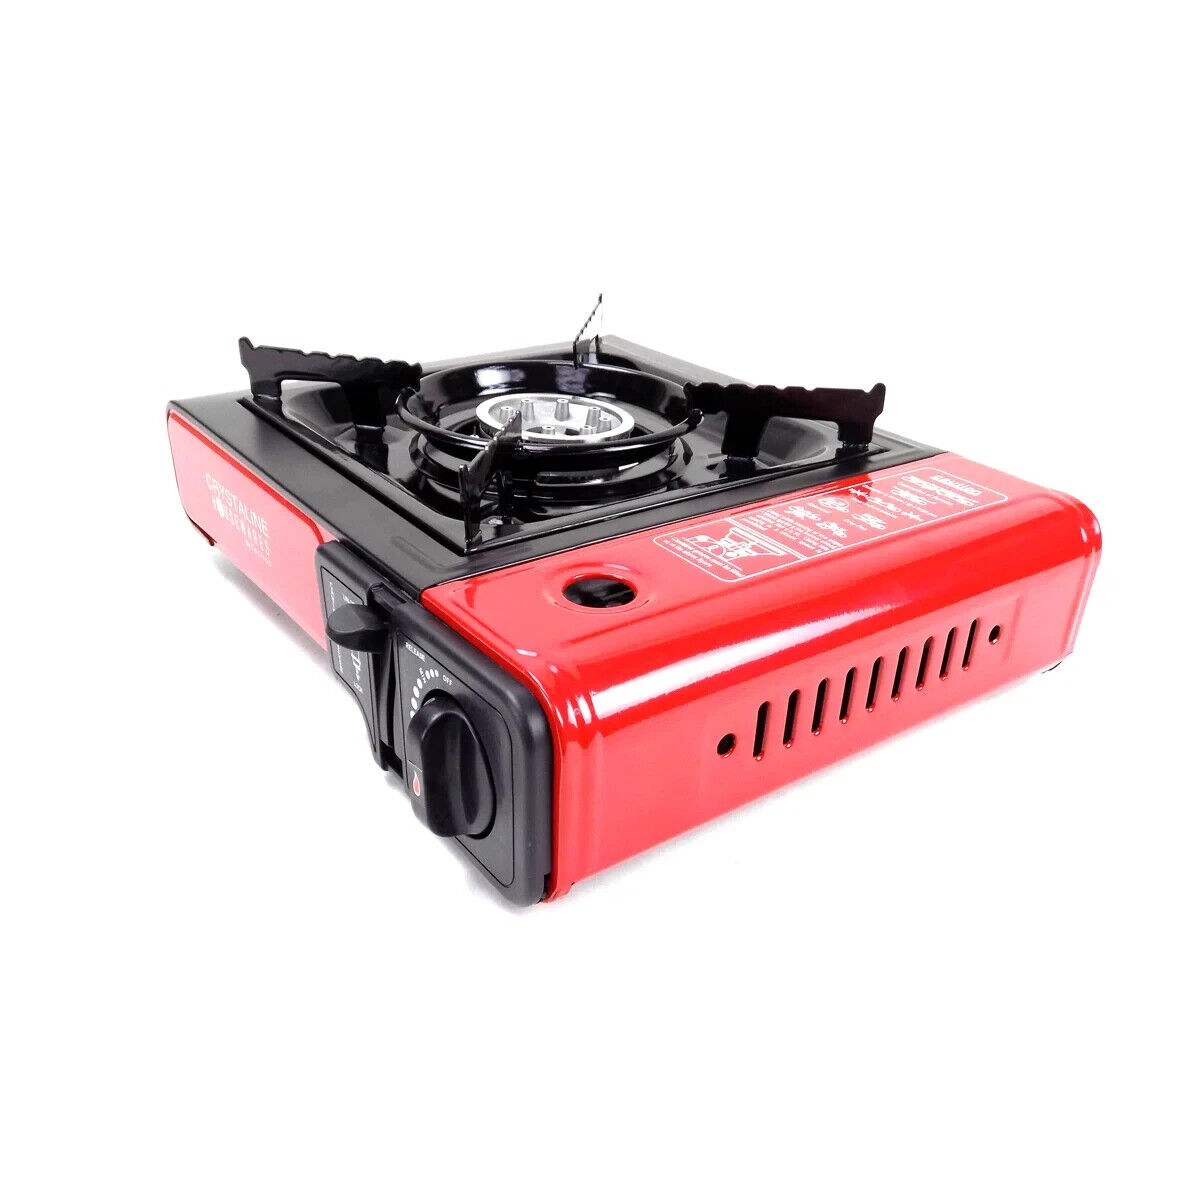 Portable Butane Gas Stove Range CSA Approved Carry Case Outdoor Camping  Cooking